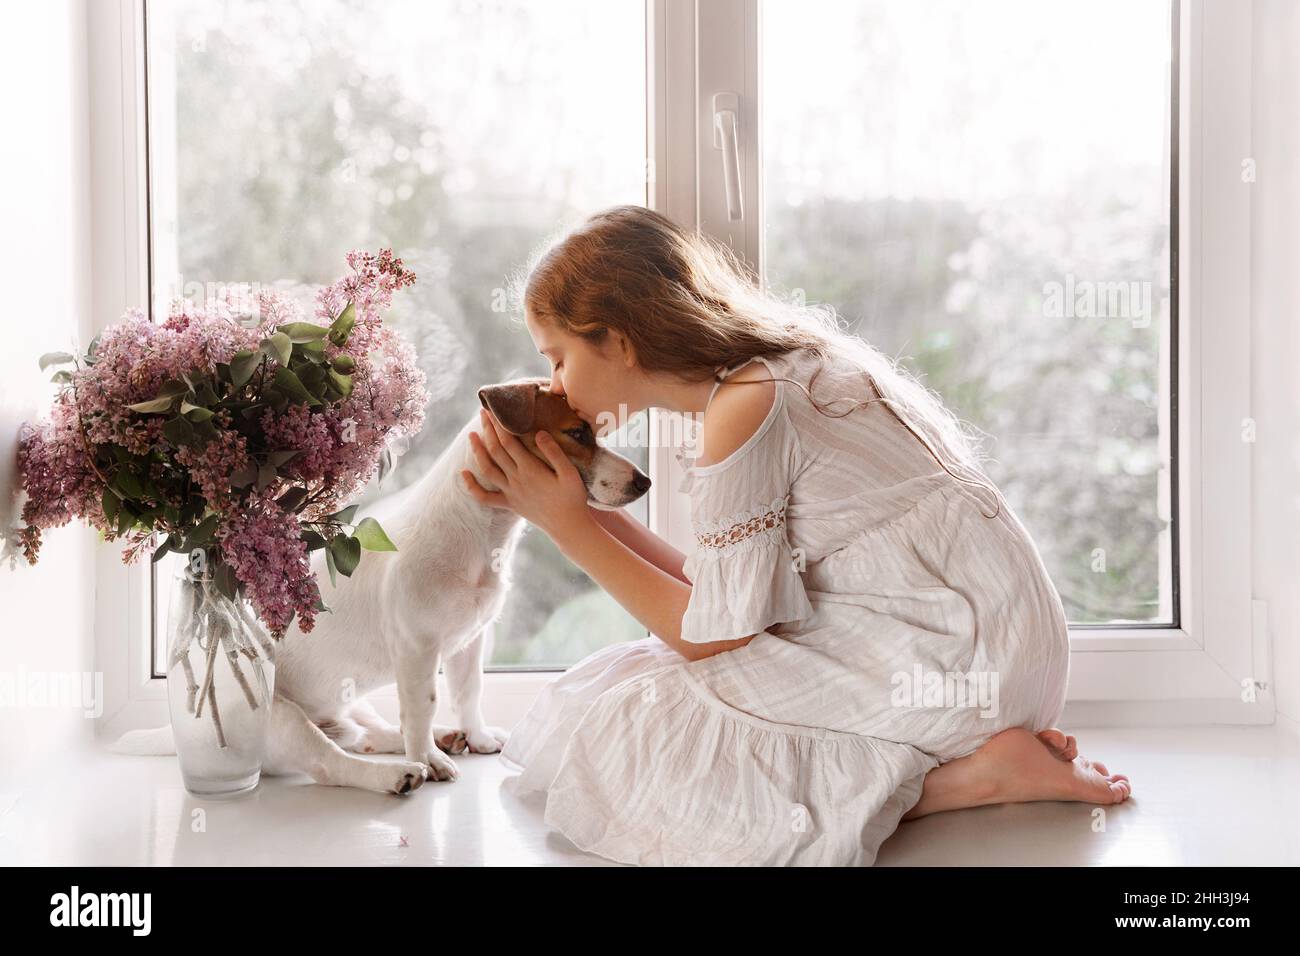 Cute little girl kissing a dog. Two friends sitting on the window. Friendship, care, happy childhood concept. Stock Photo